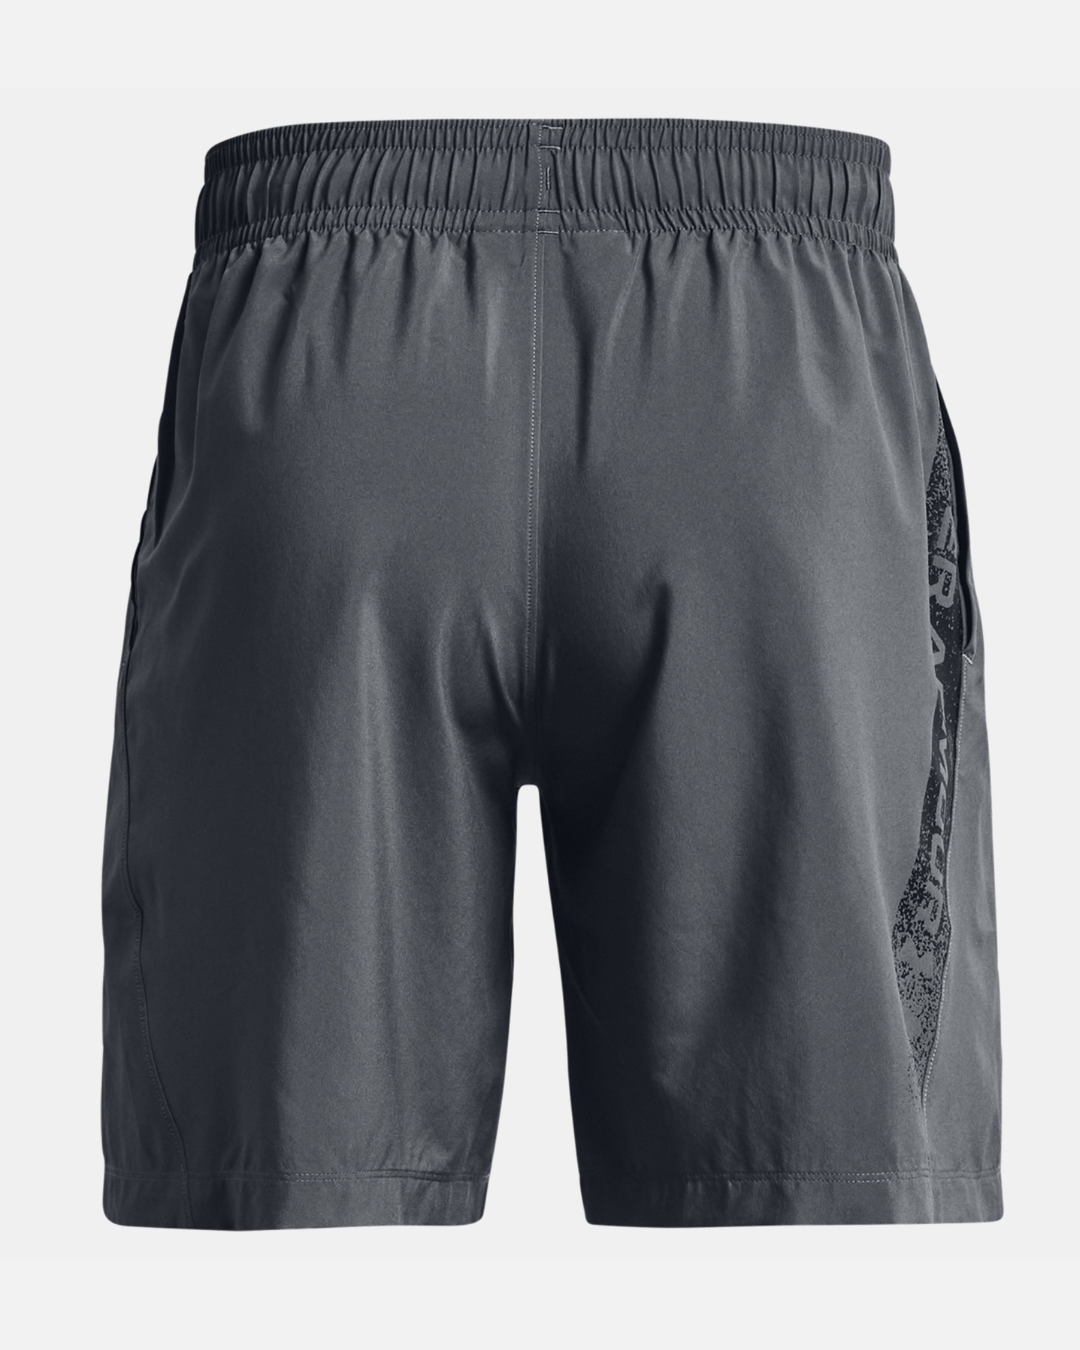 Under Armor Woven Graphic Shorts - Grey/Black